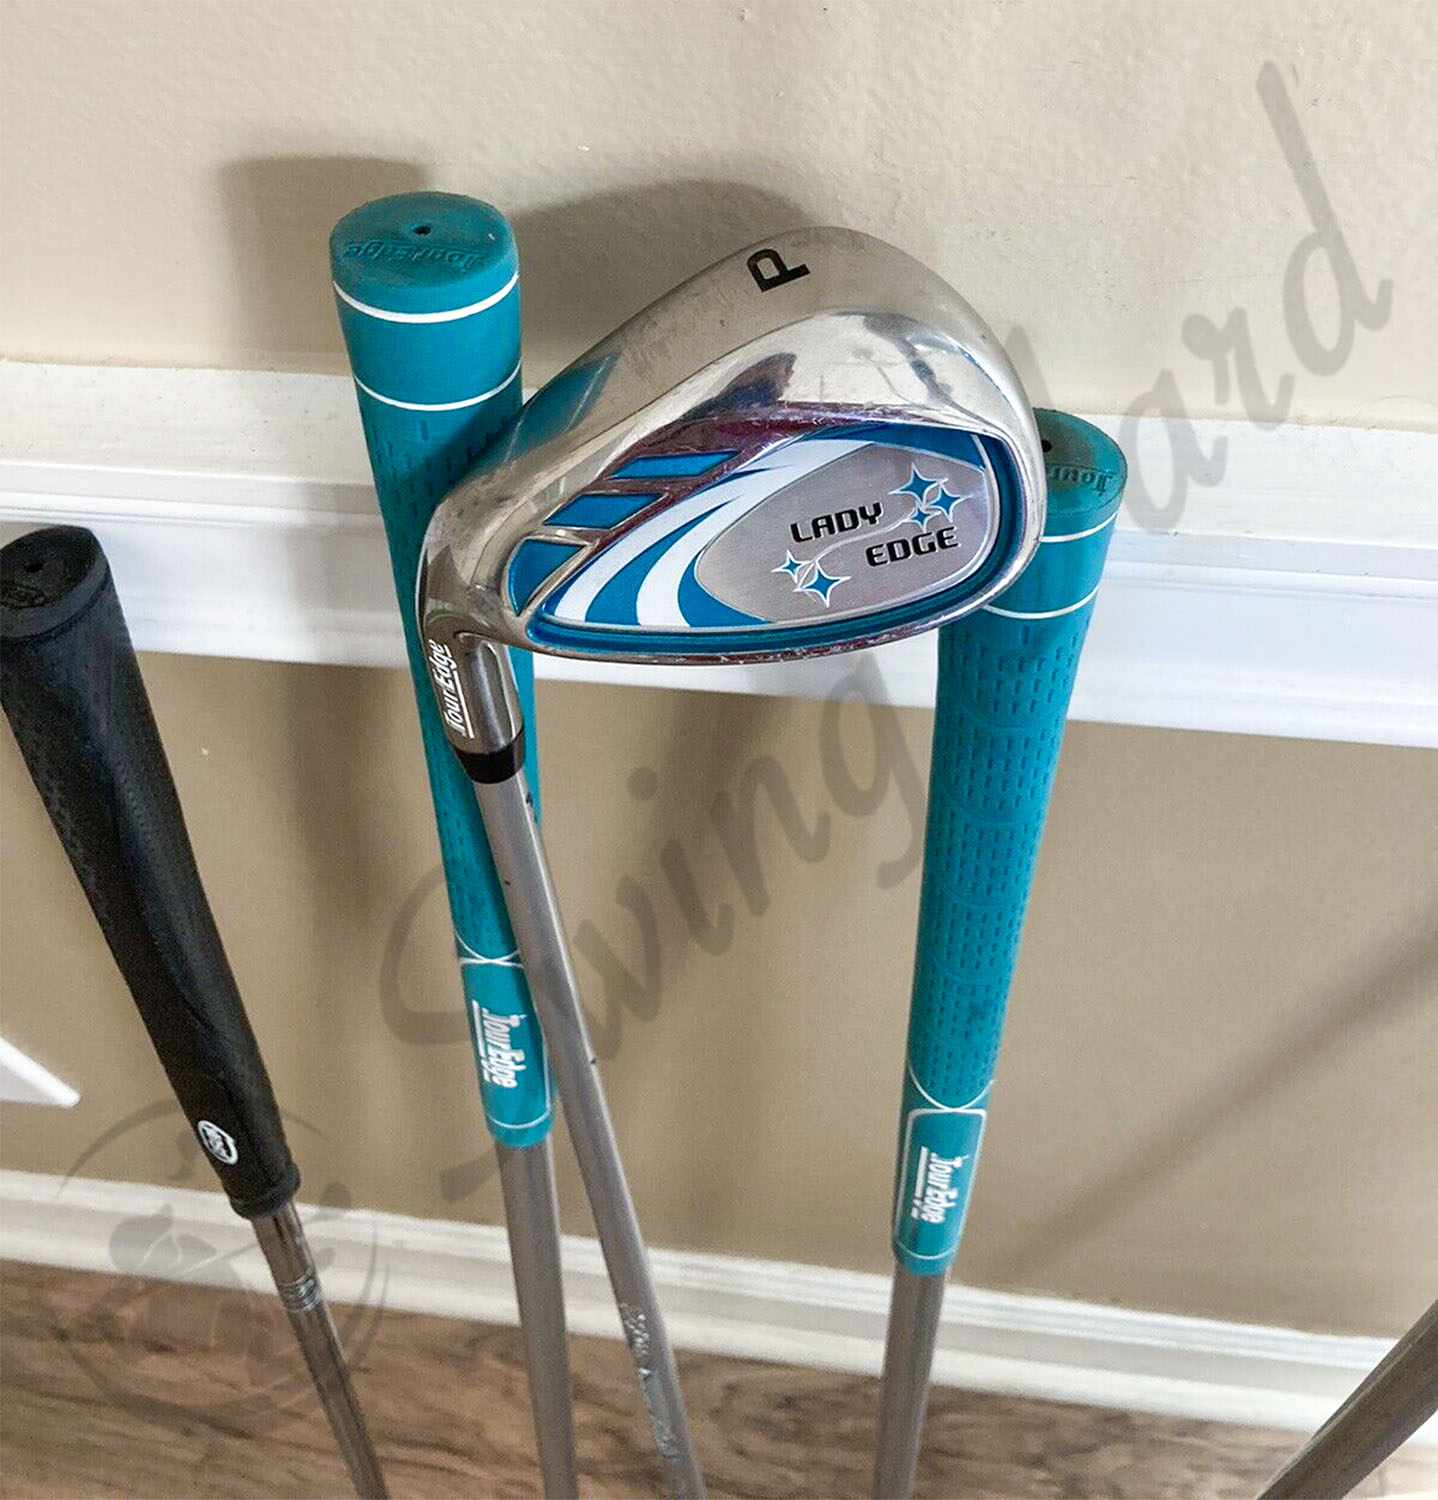 The pitching wedge of Tour Edge Lady Edge in the living room